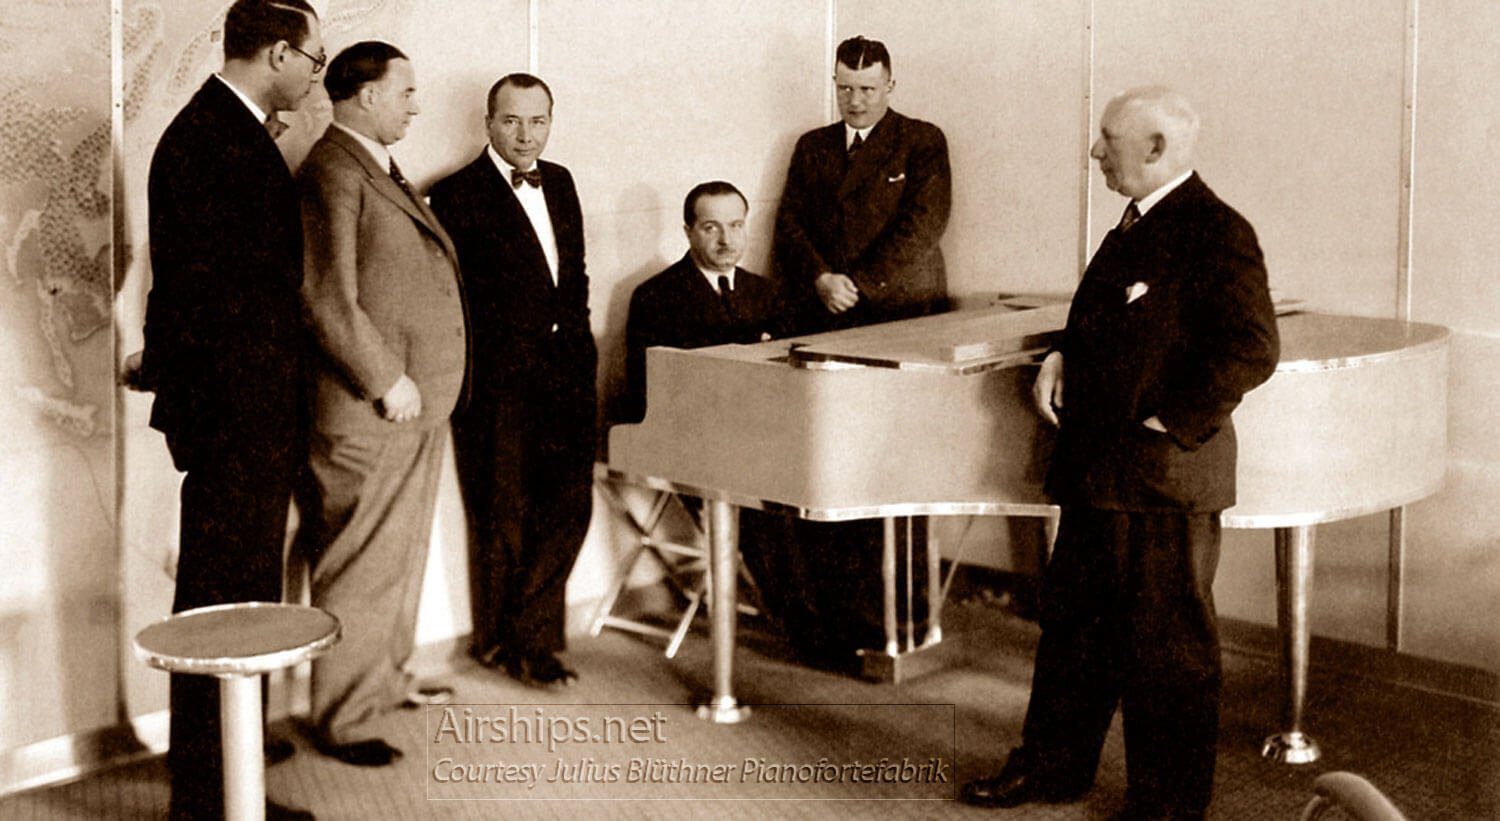 Franz Wagner at Hindenburg’s Piano, with Dr. Rudolf Bluthner-Haessler to his left in the corner, and Captain Ernst Lehmann to his right. Photo courtesy Julius Blüthner Pianofortefabrik.